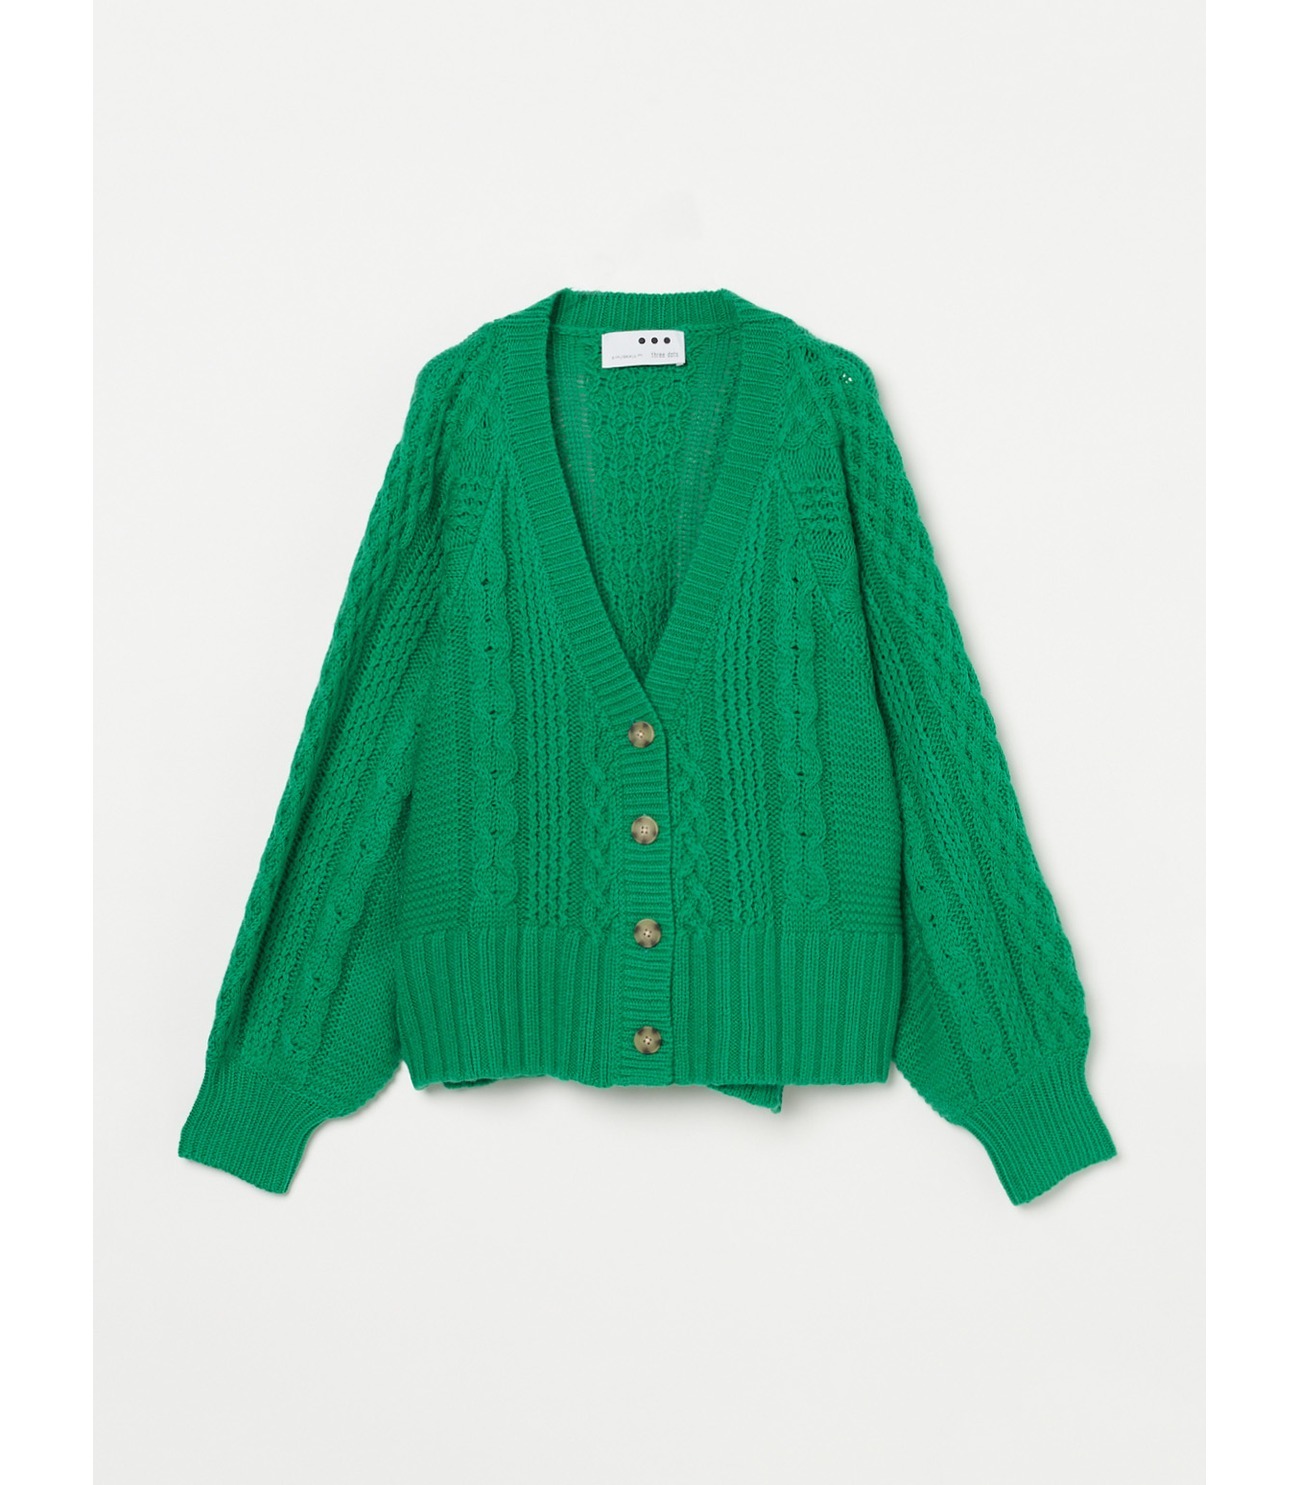 Bulky sweater l/s cable cardy 詳細画像 green 1